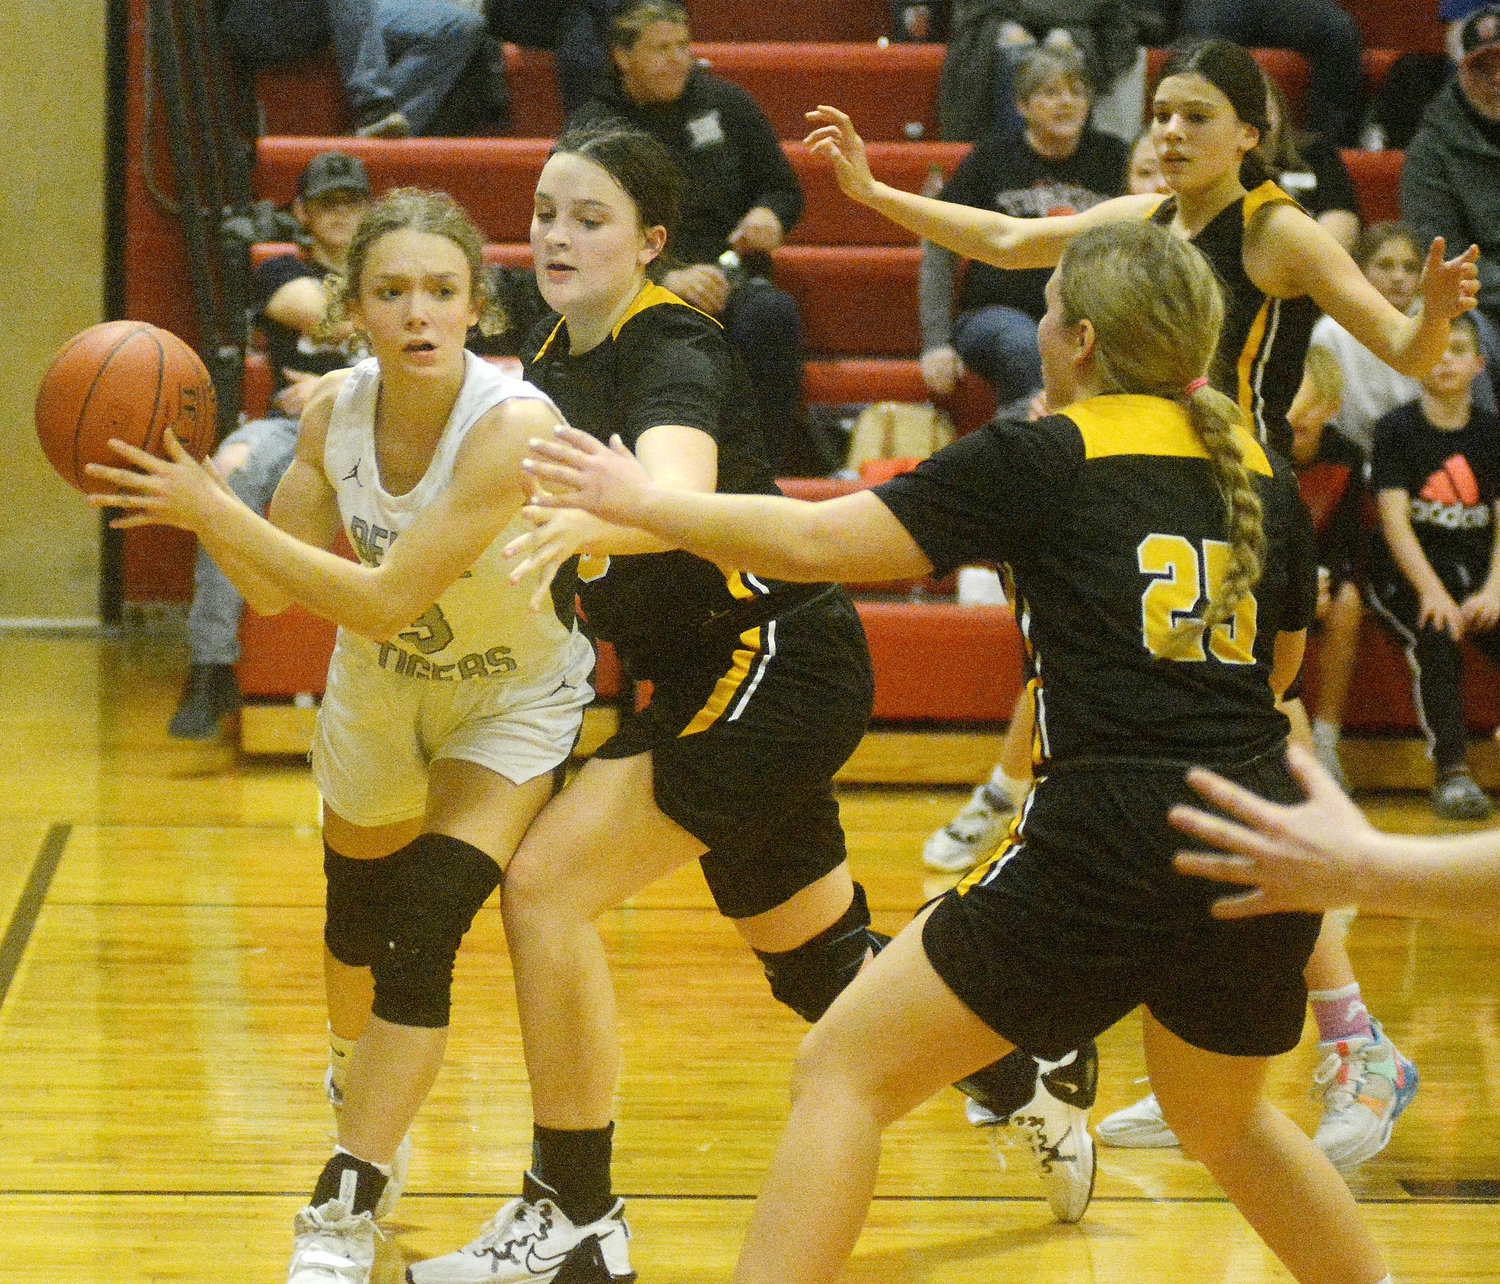 Hali Naber (far left) looks for someone to pass the ball to while being double teamed by Vienna’s Aubrey Schwartze and Marissa Hollis during Battle of Maries County girls basketball action at Belle High School.